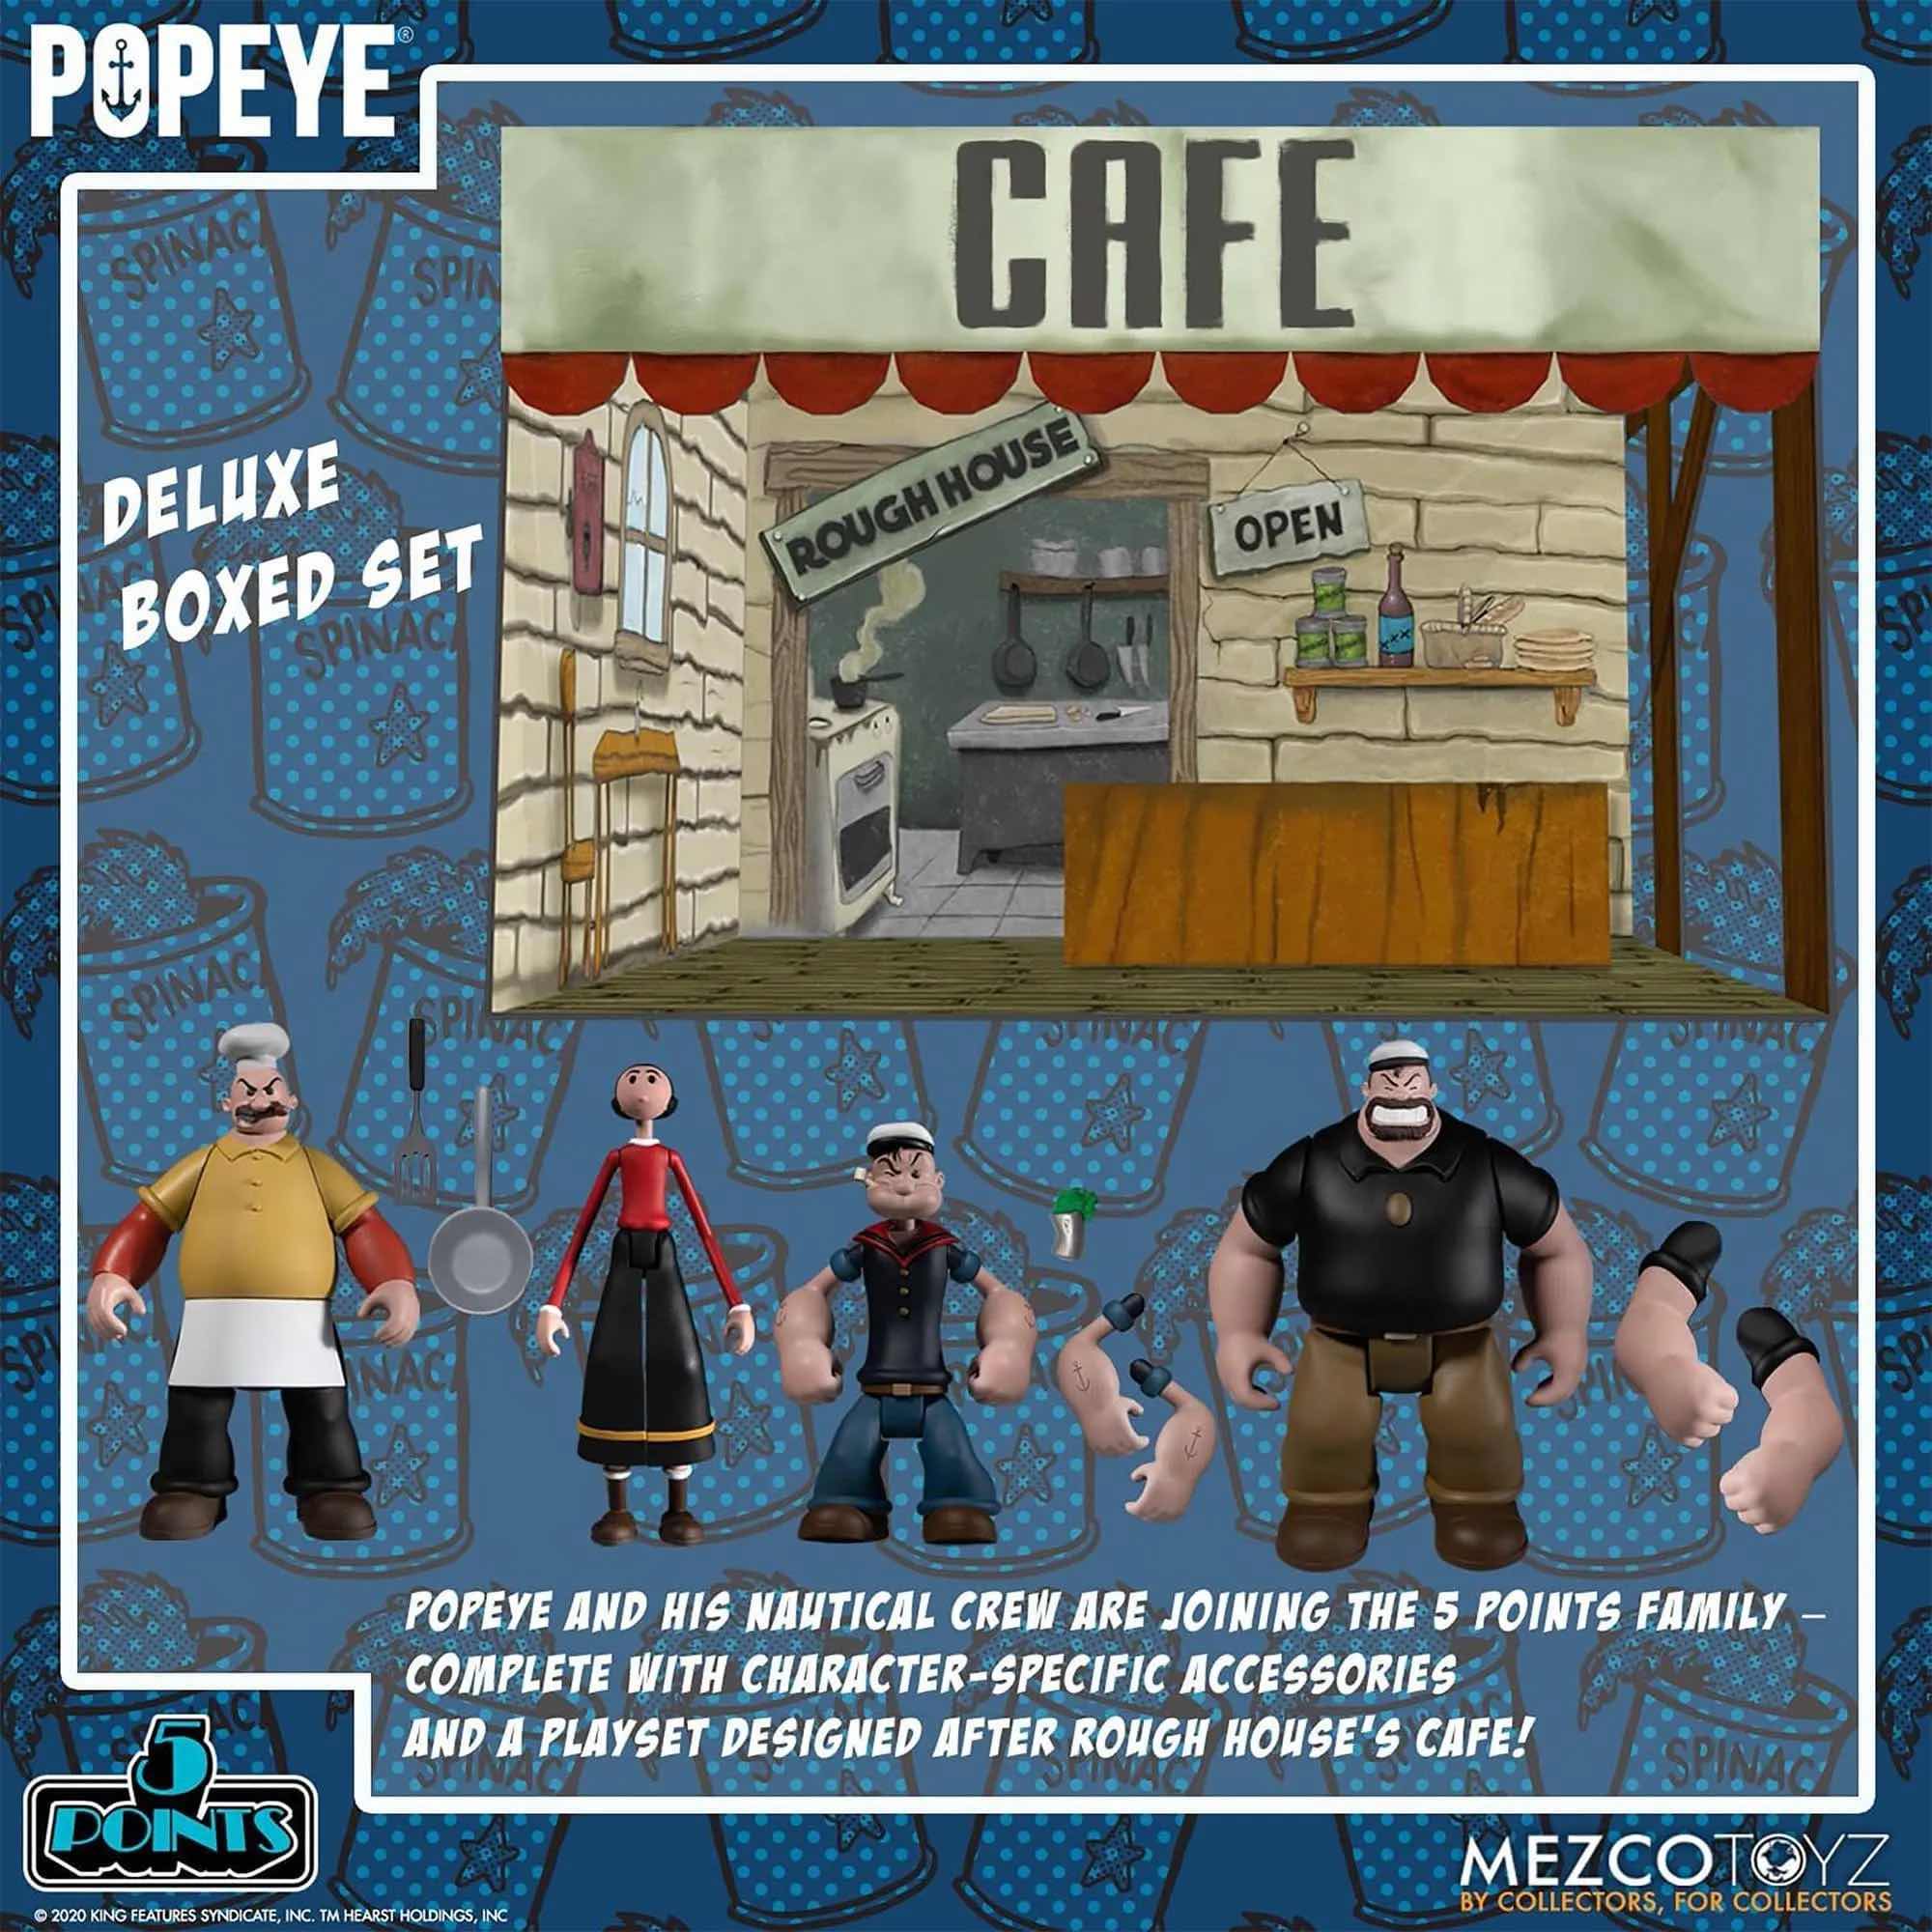 Photo 2 of NEW MEZCO TOYZ 5 POINTS POPEYE DELUXE BOX SET (4 ACTION FIGURES & ACCESSORIES)